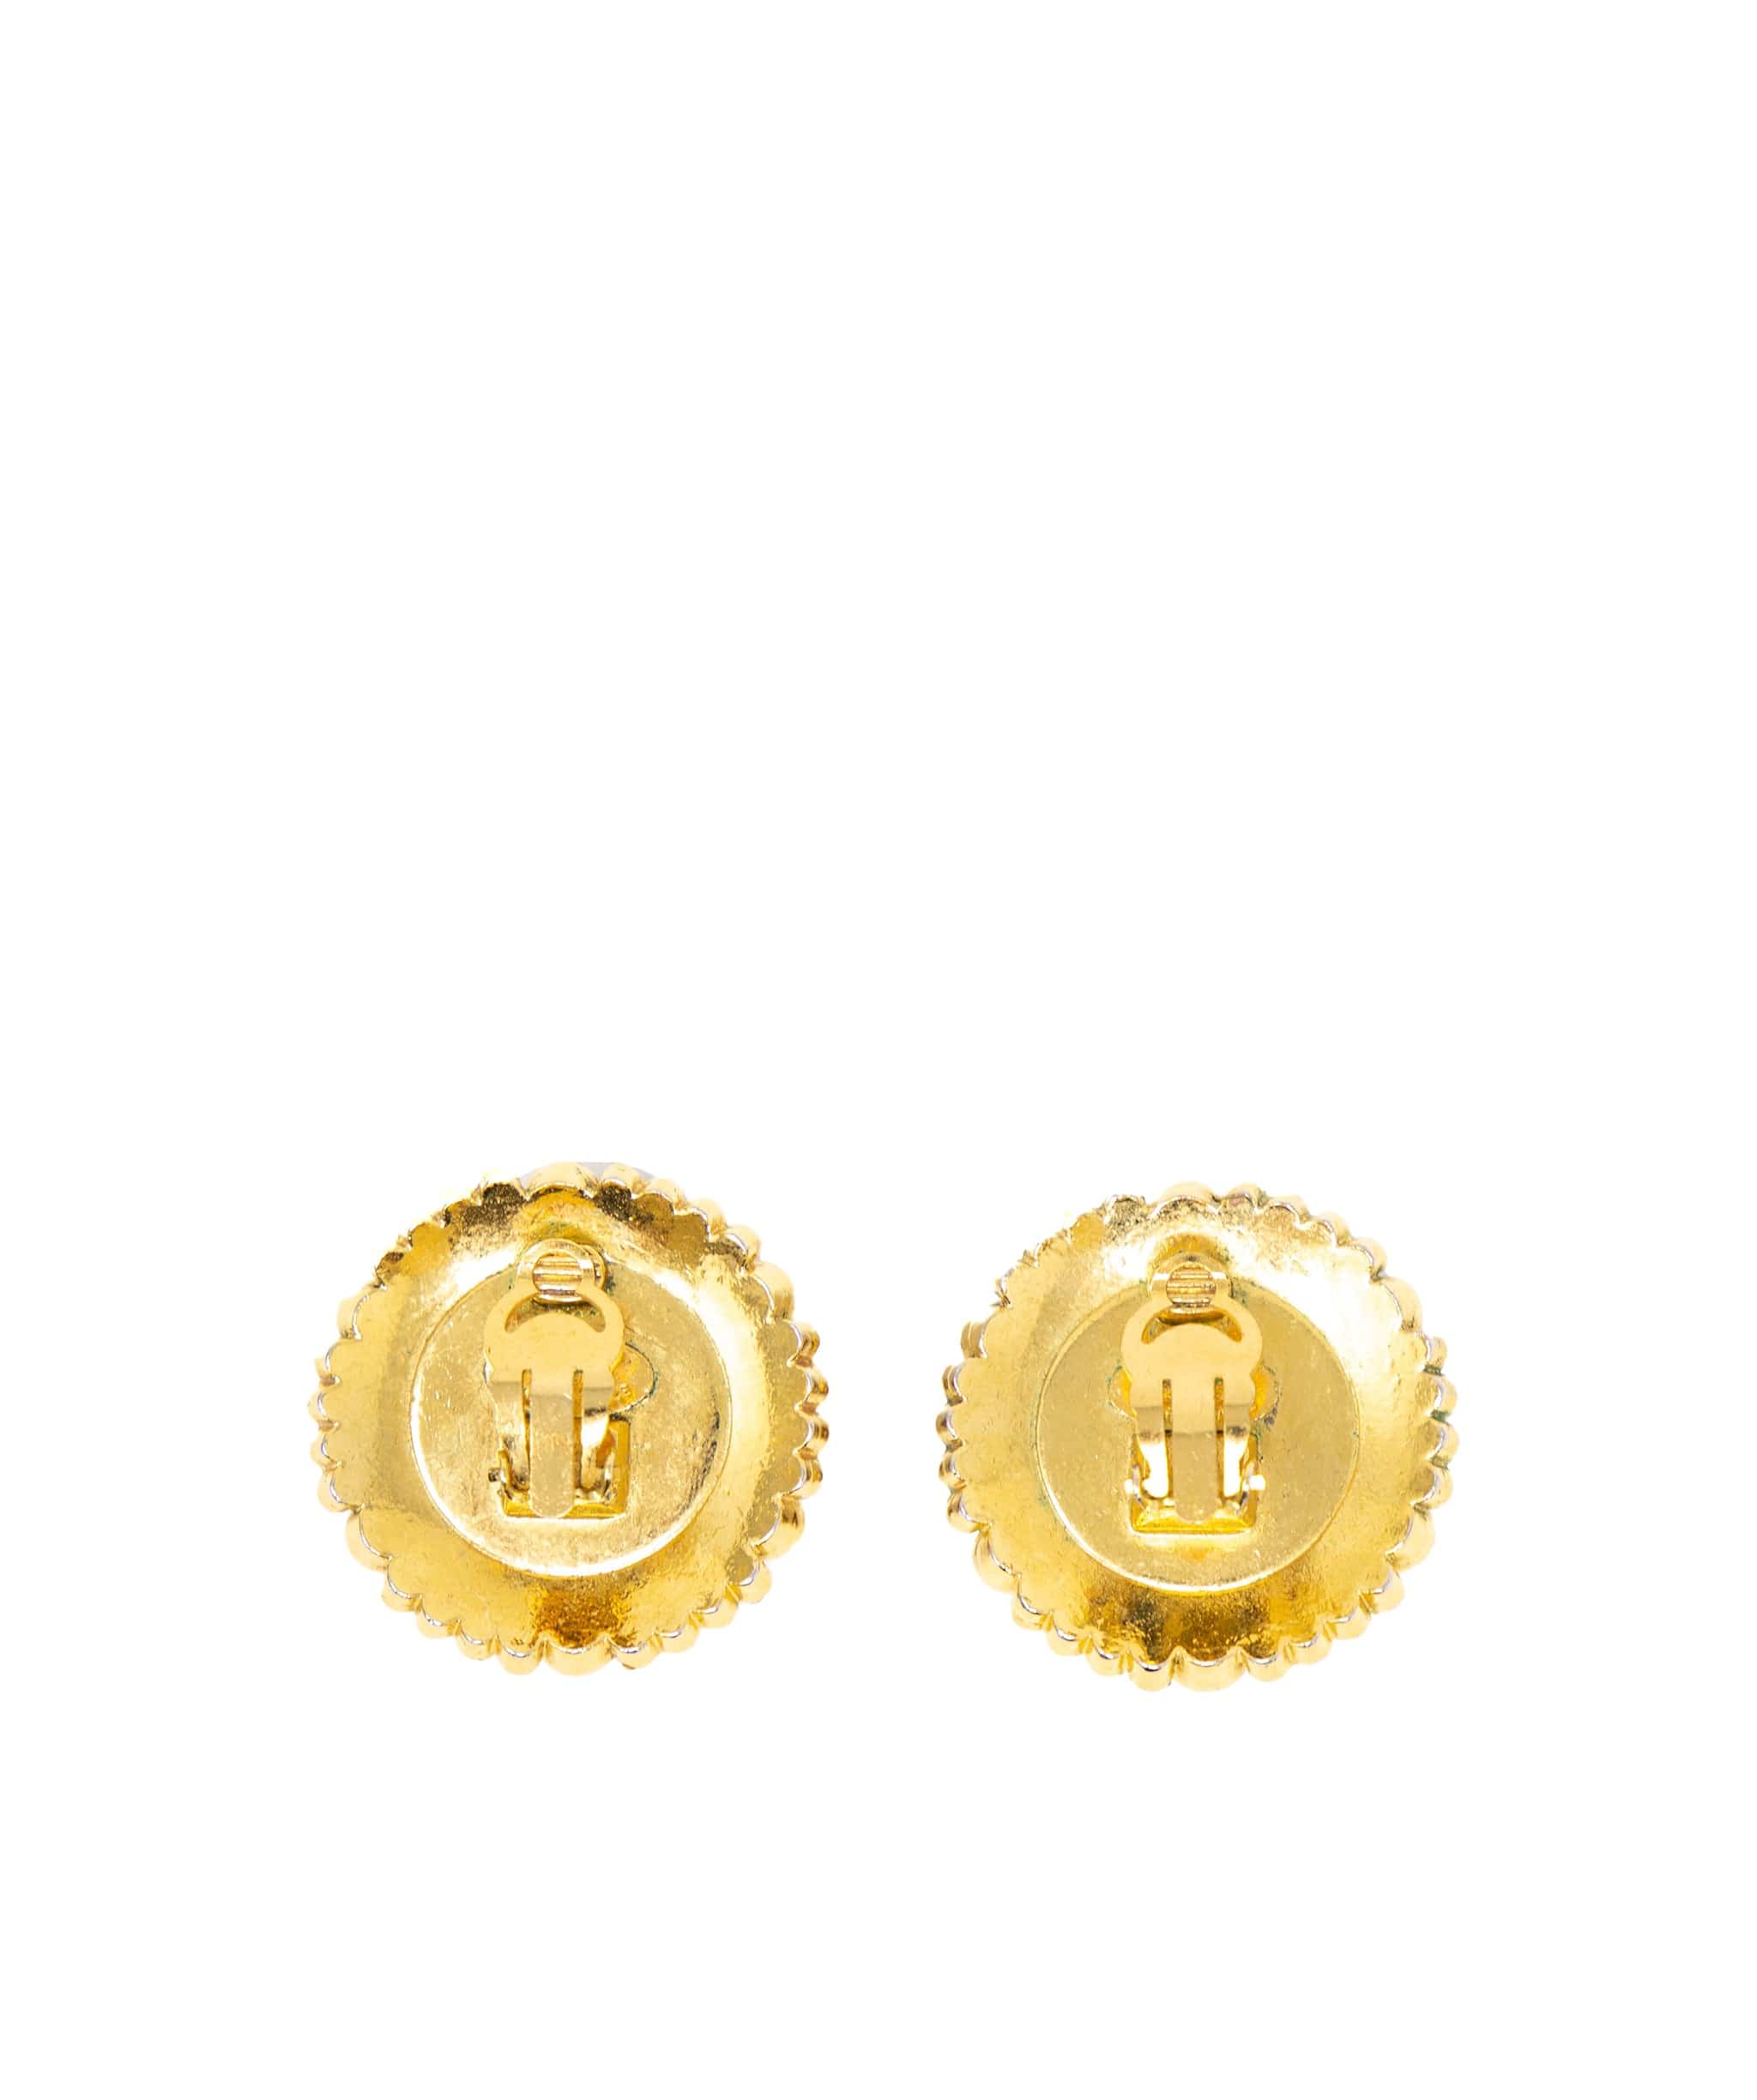 Prada Chanel Pearl and Gold Vintage Clip Earrings - AGL2070